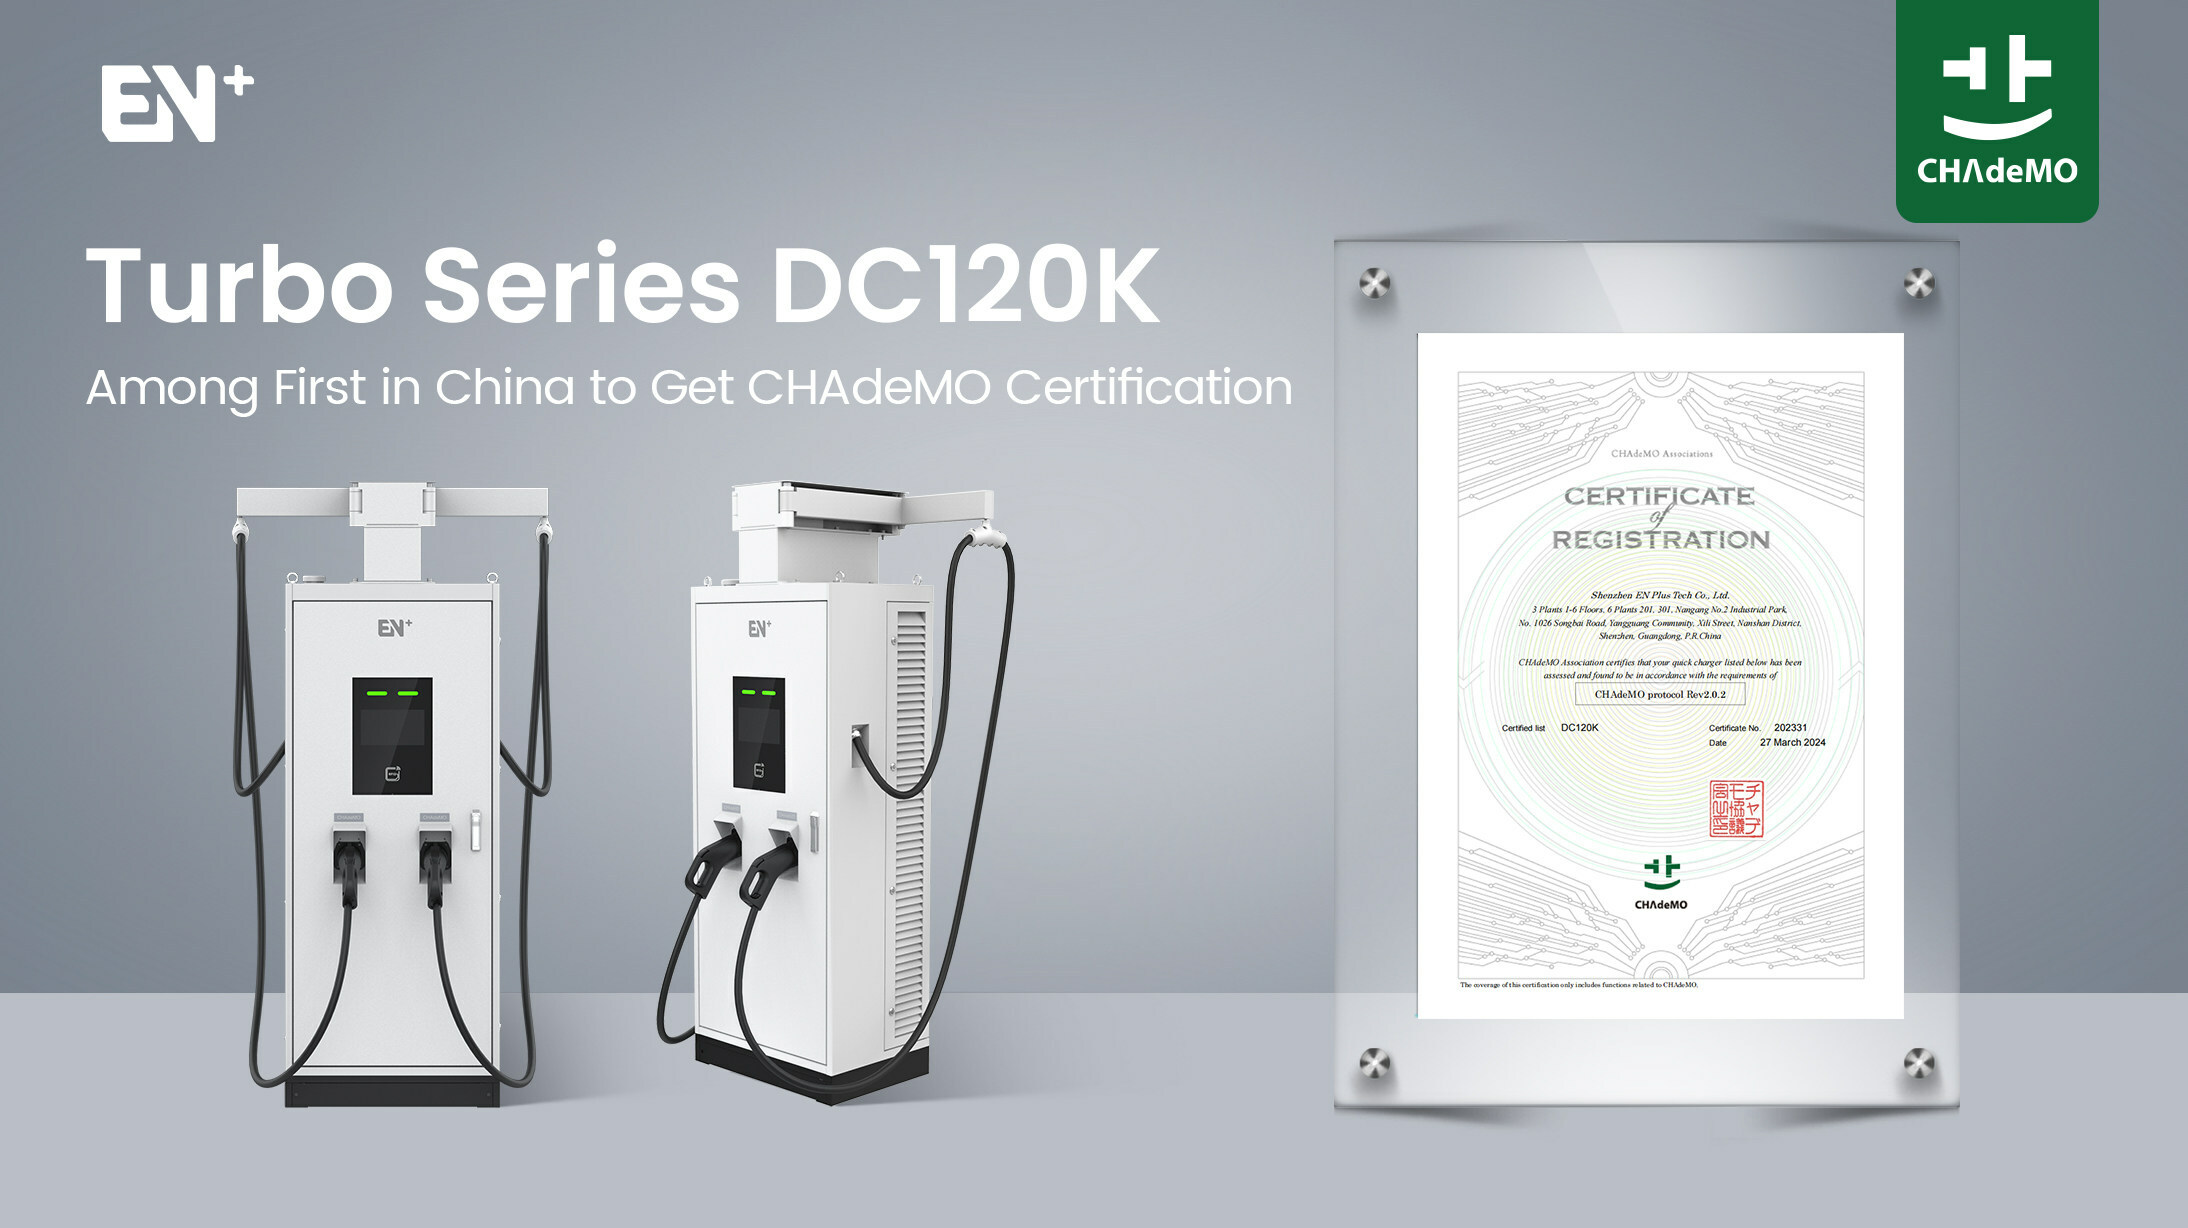 EN Plus is one of the first EV charger manufacturers in China to receive certification for the latest CHAdeMO Rev.2.0.2 charging standard. Image: Shenzhen EN Plus Tech Company